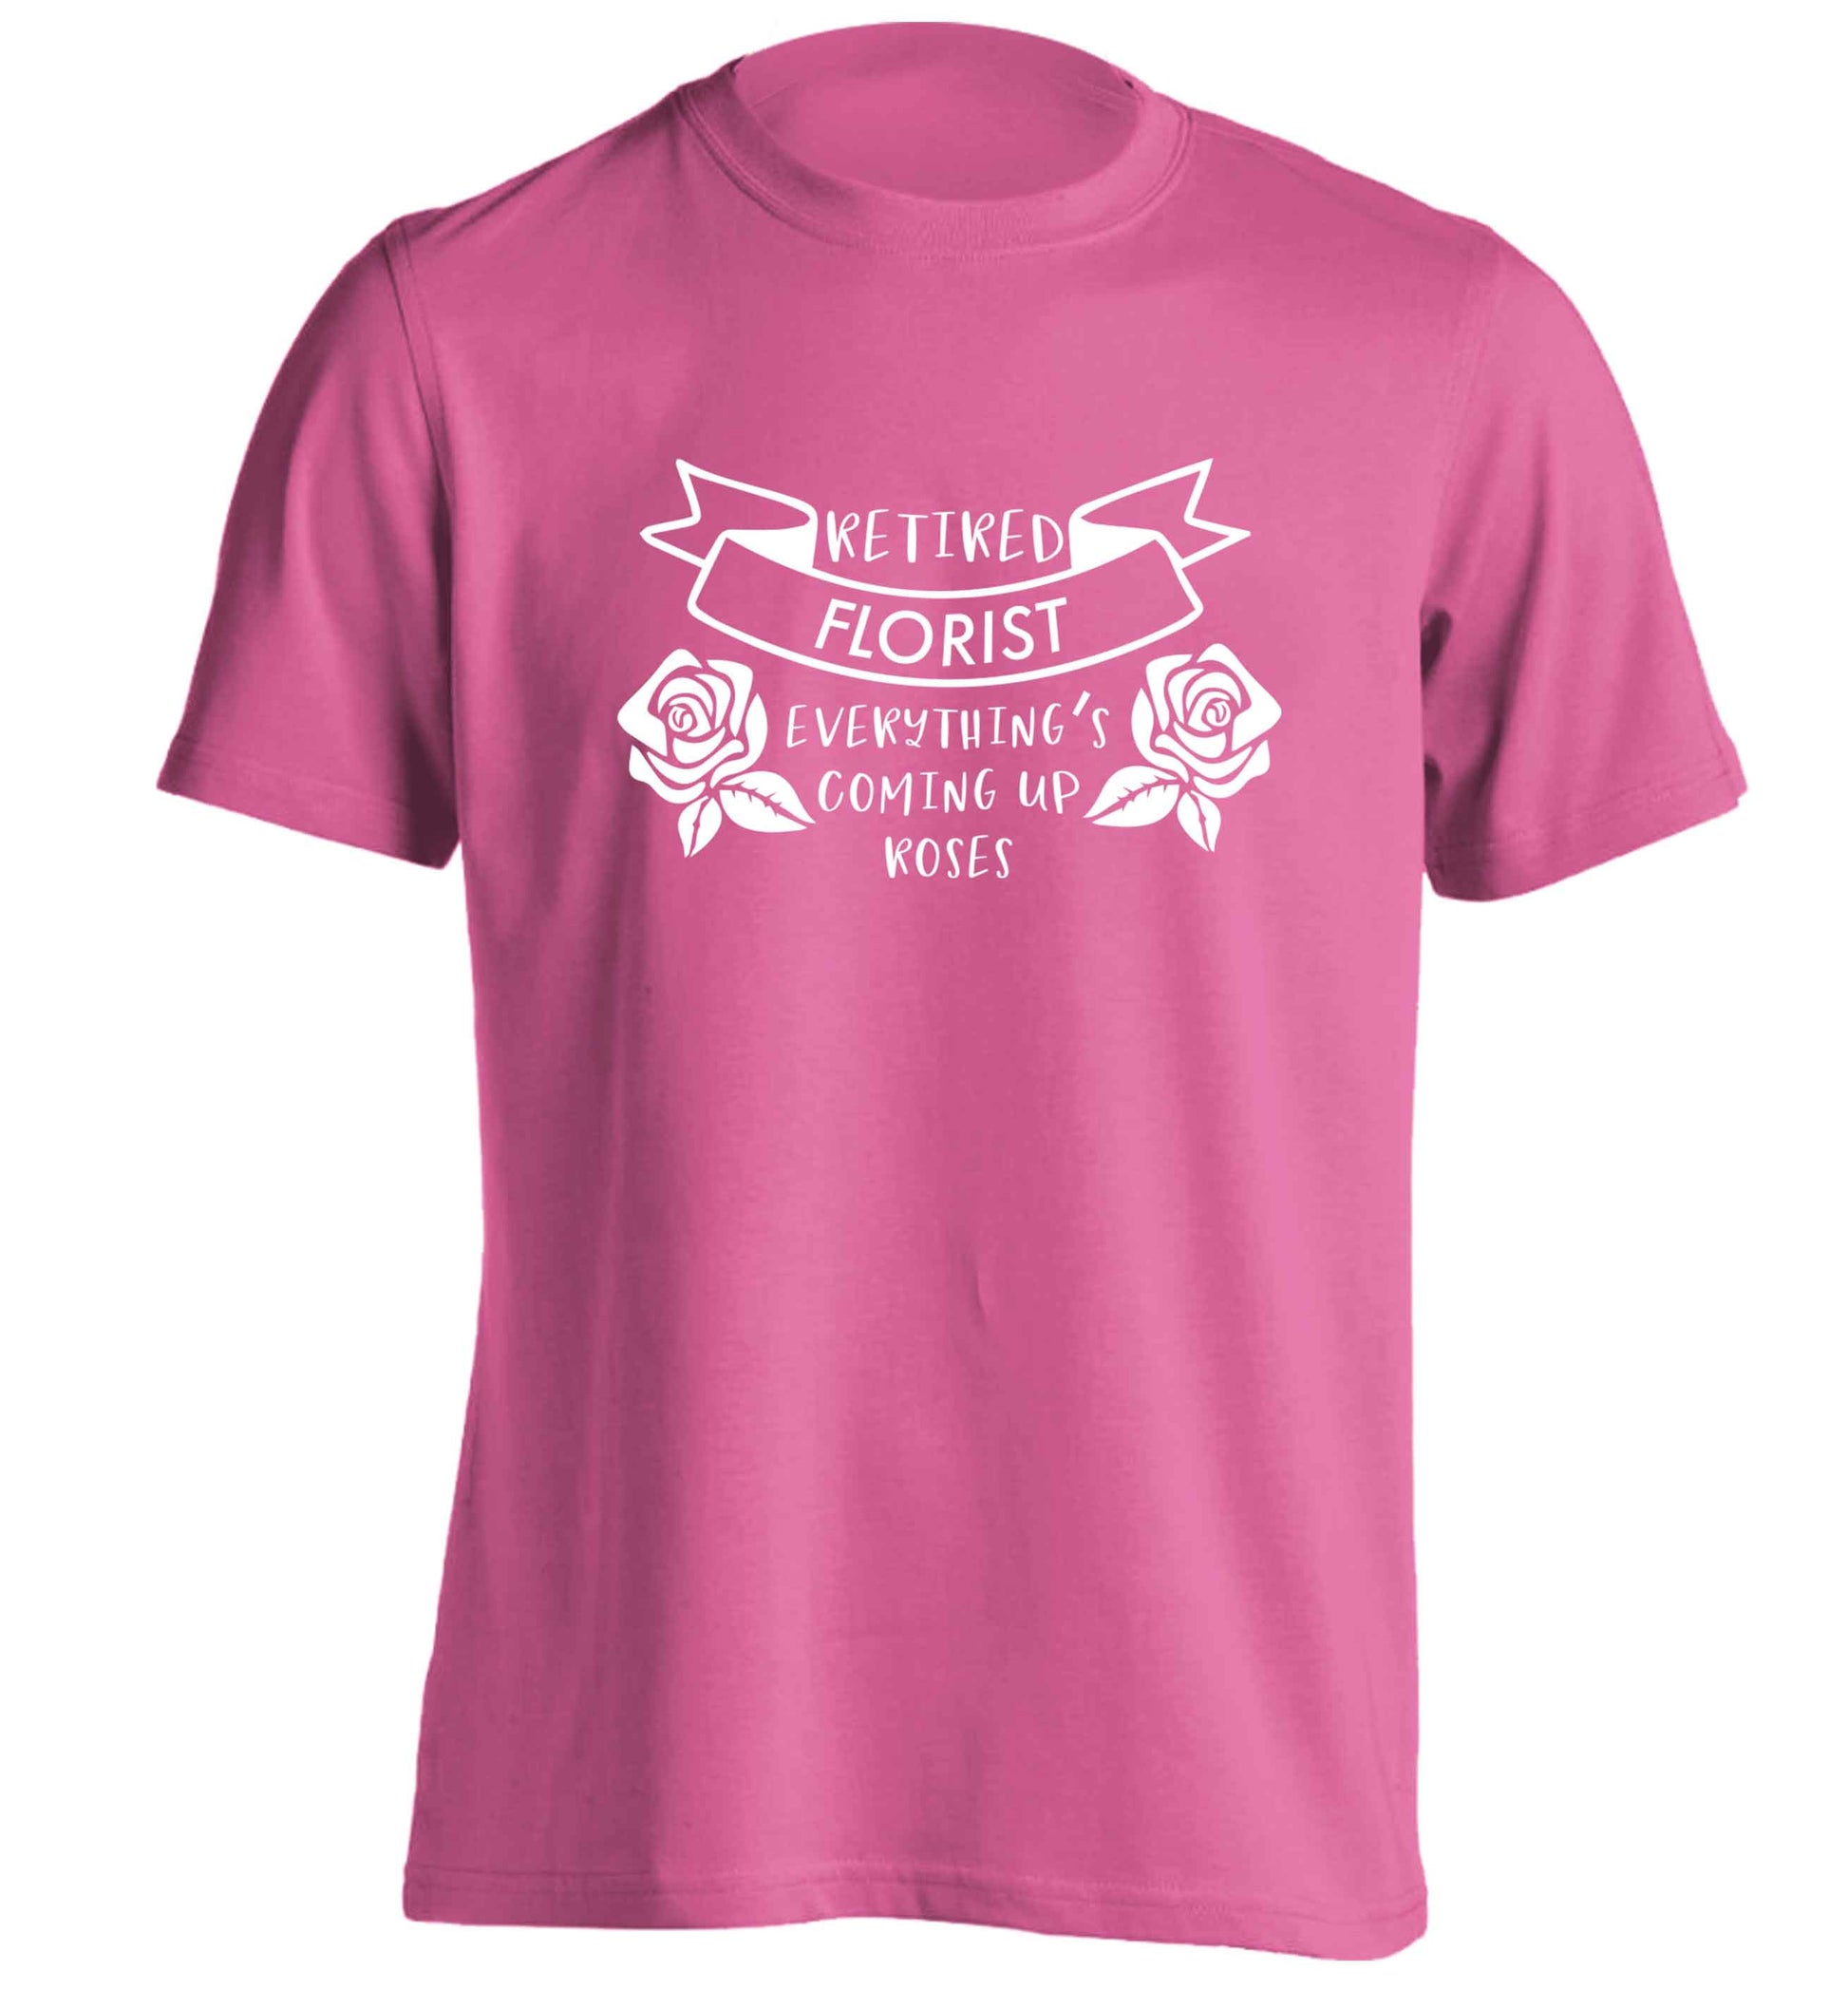 Retired florist everything's coming up roses adults unisex pink Tshirt 2XL